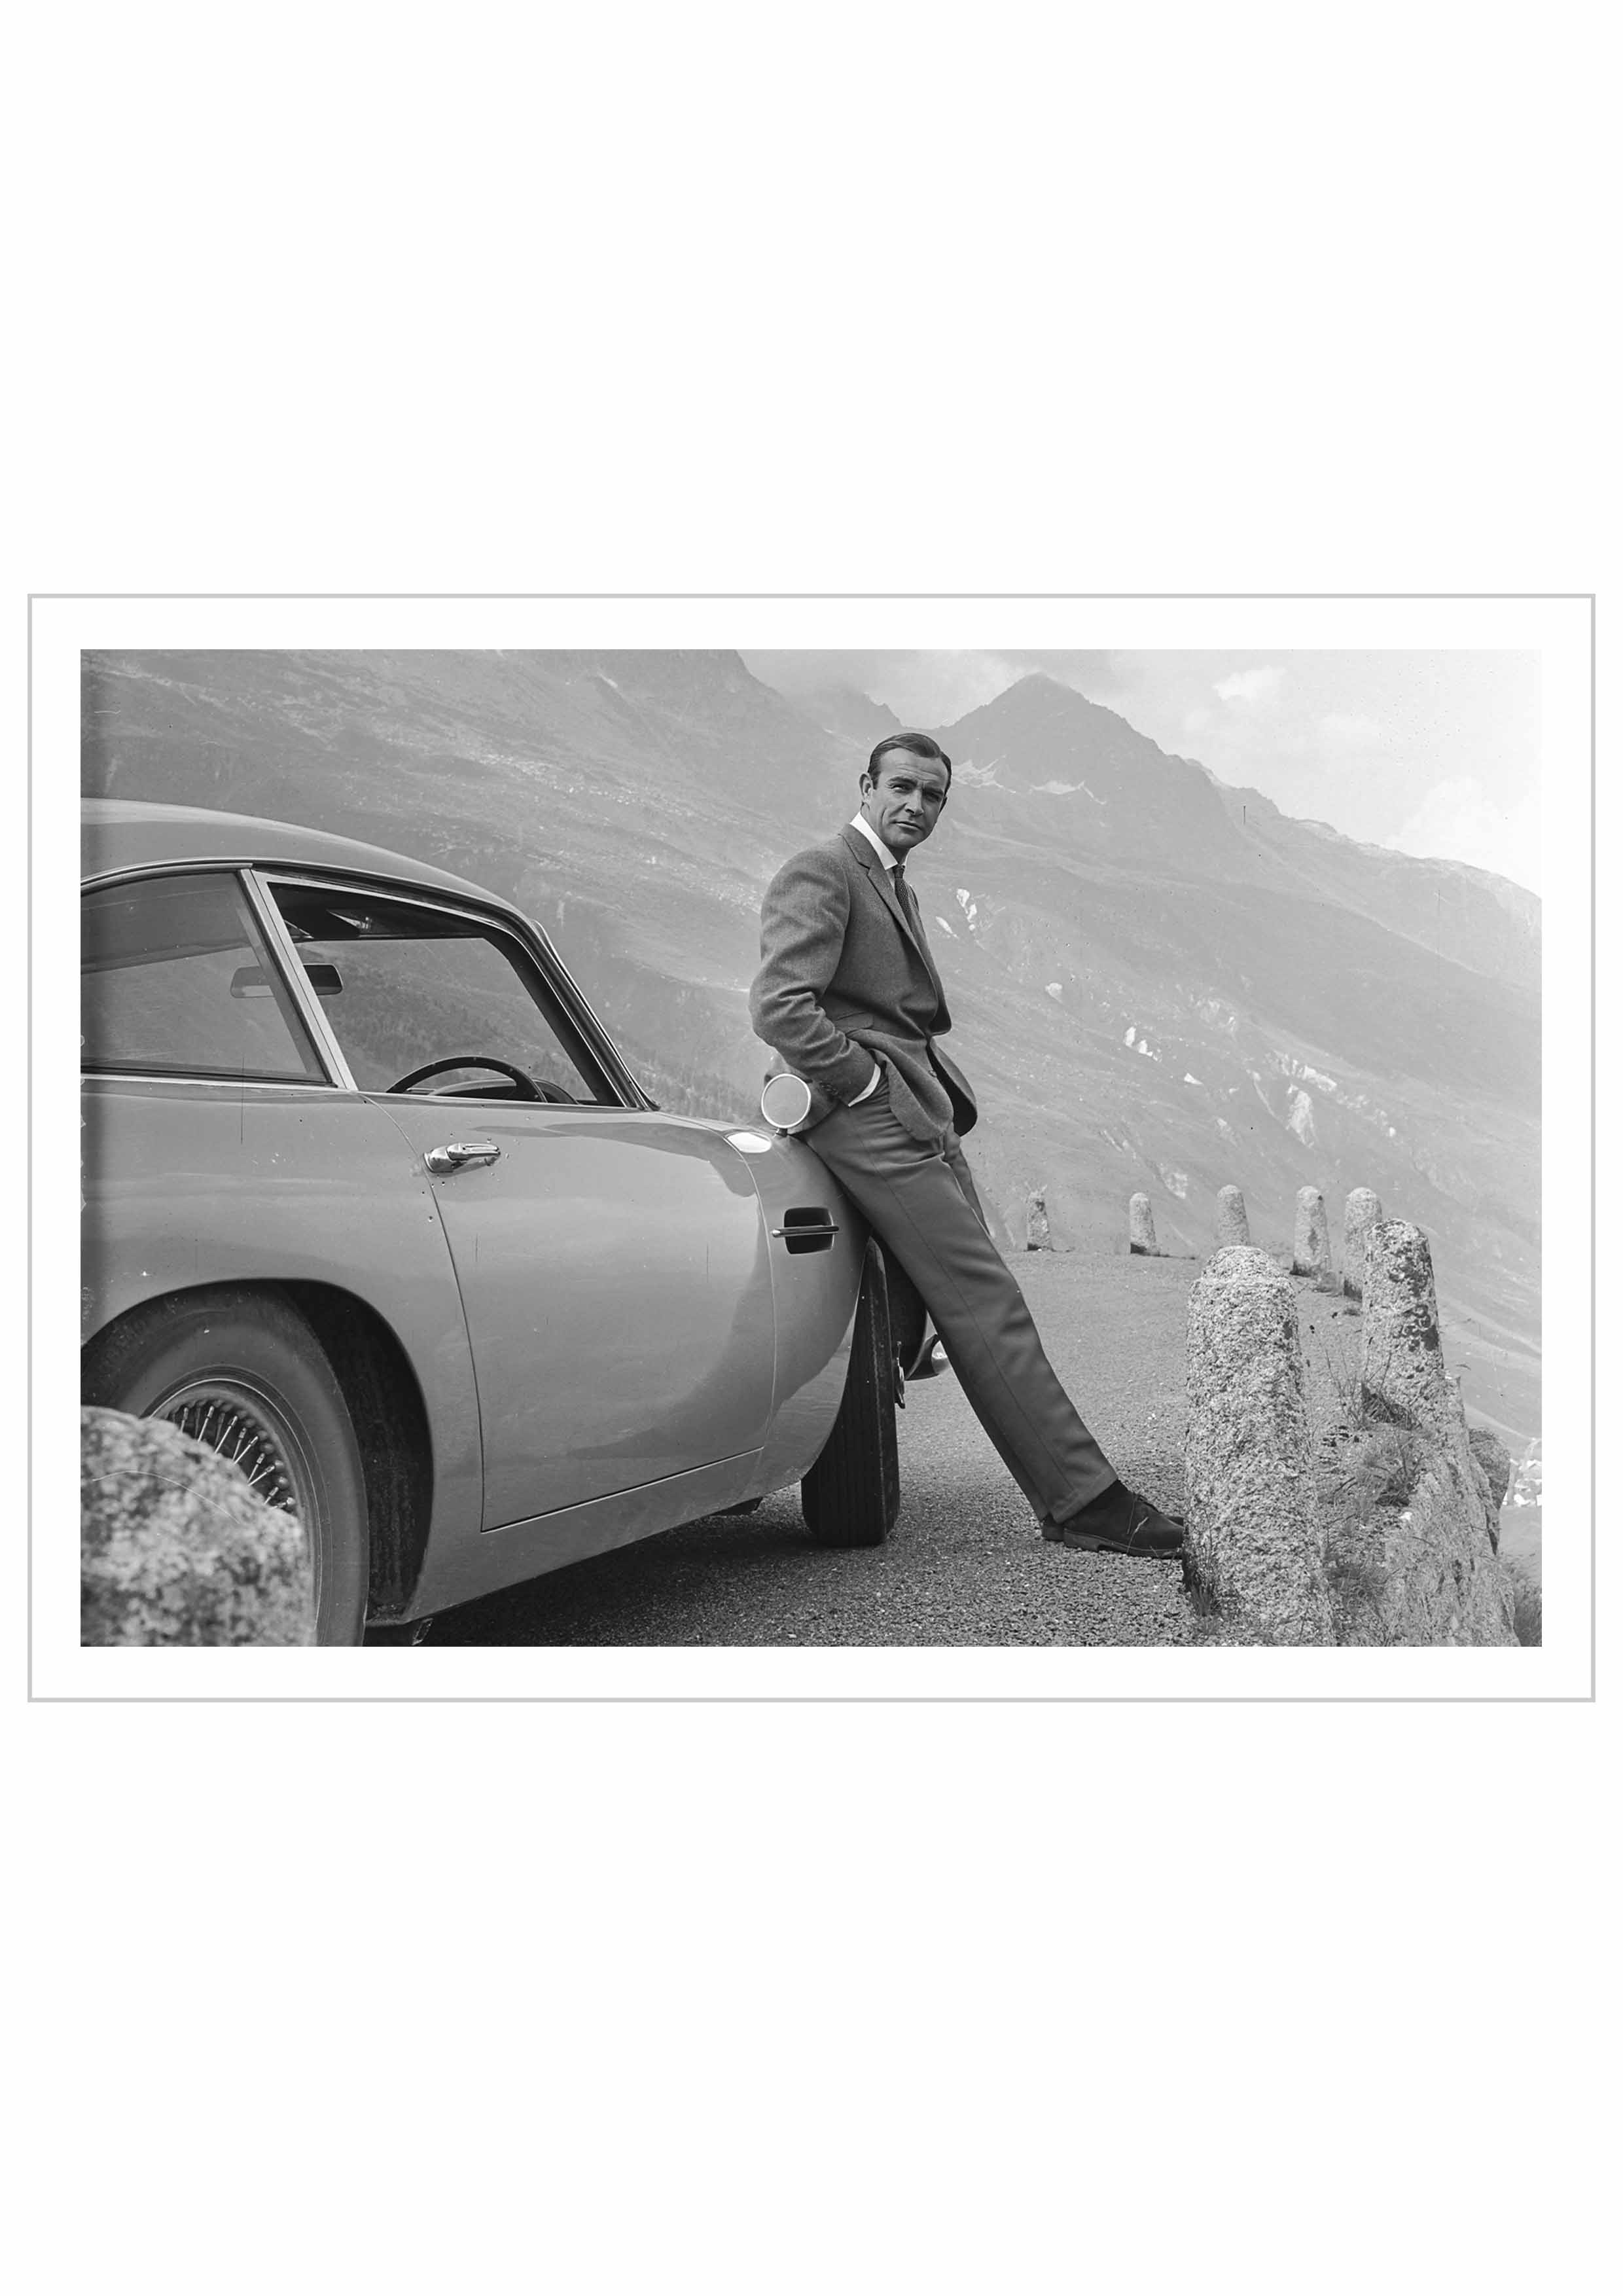 Sean Connery with Aston Martin DB5 During the Filming of 'Goldfi